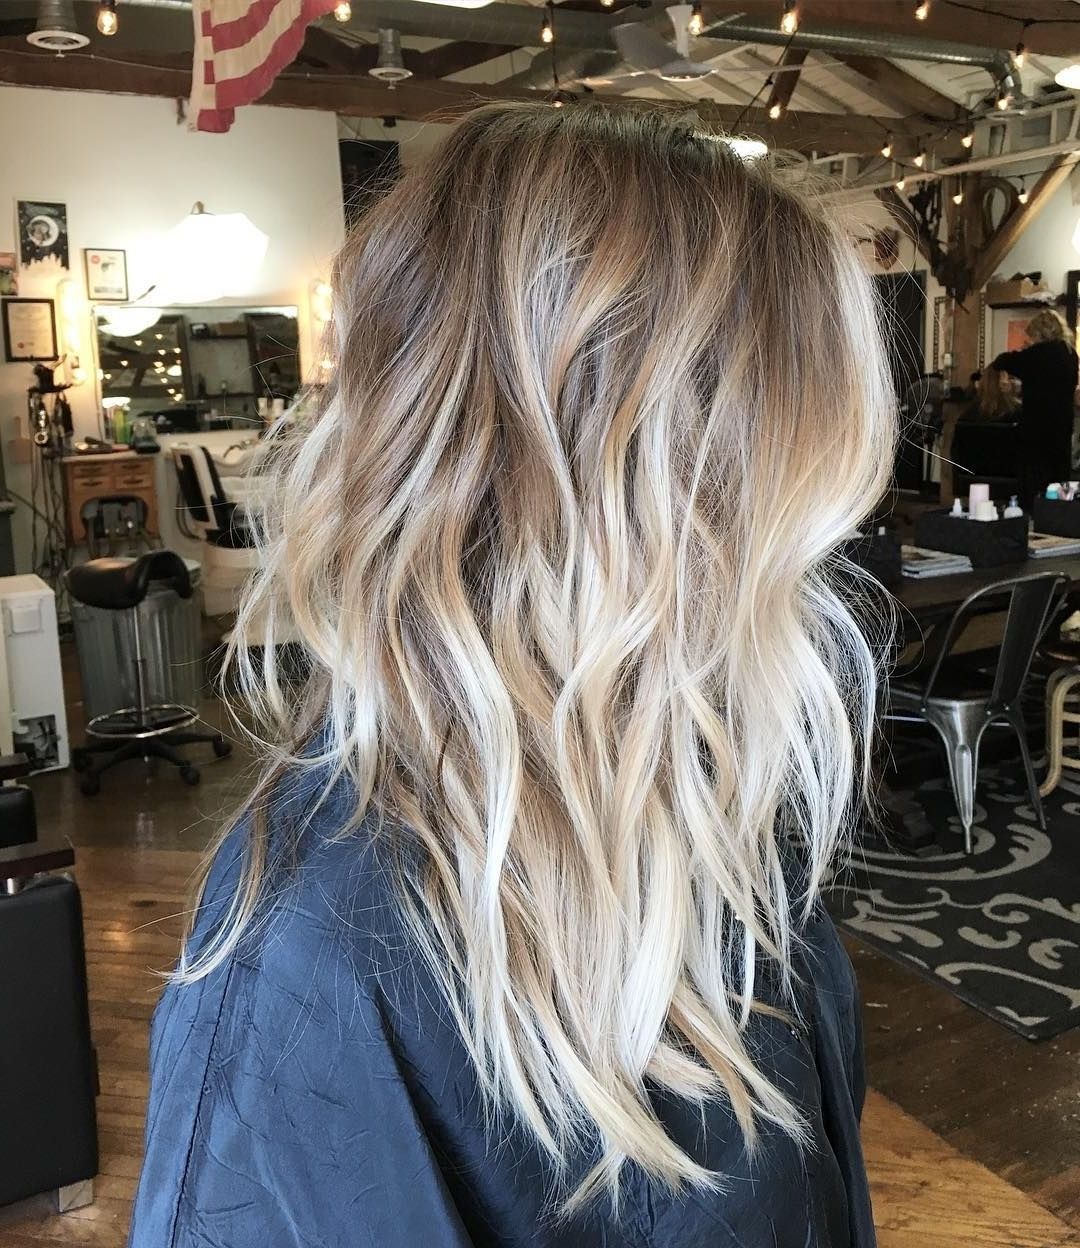 Messy Dark Blonde Hair With Vanilla Blonde Balayage And Chunky, Wavy In Recent Bright Long Bob Blonde Hairstyles (View 7 of 20)